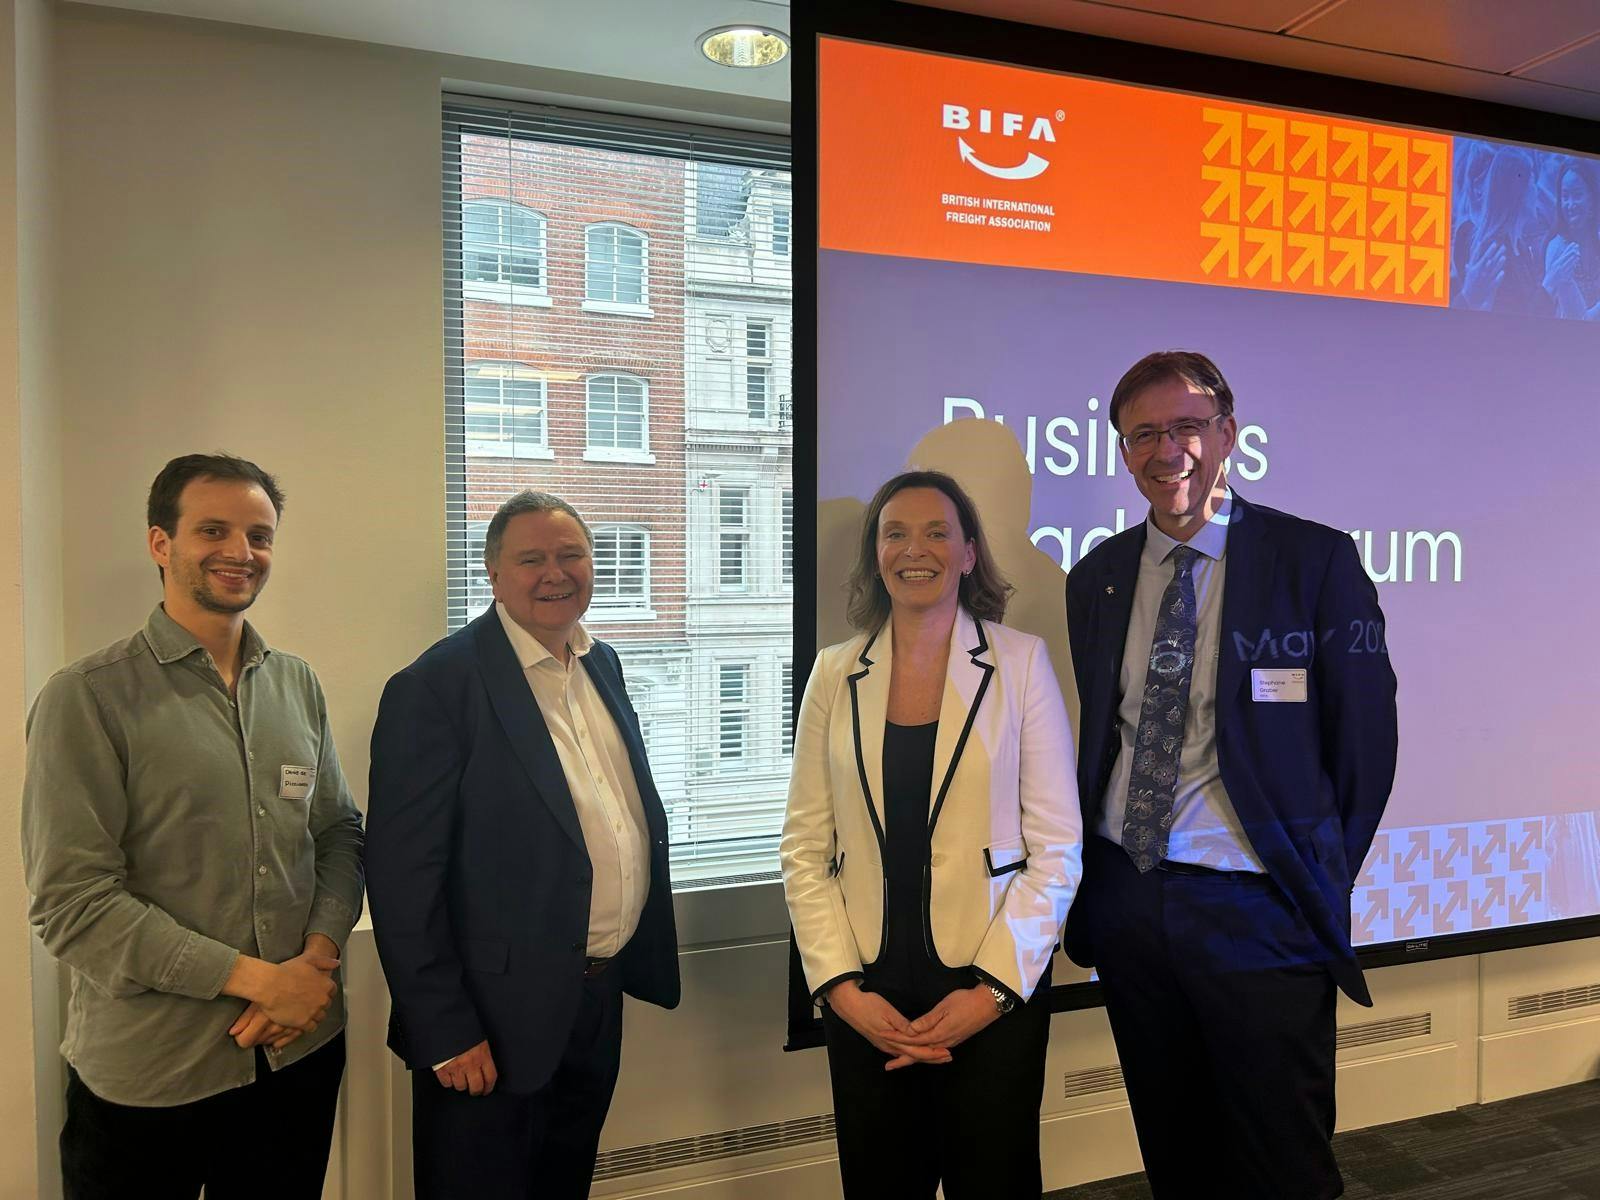 From left to right: Pledge Founder and CEO, David de Picciotto; BIFA Director General, Steve Parker; Shape Tomorrow Founder, Kelly Hobson; FIATA Director General, Stéphane Graber.